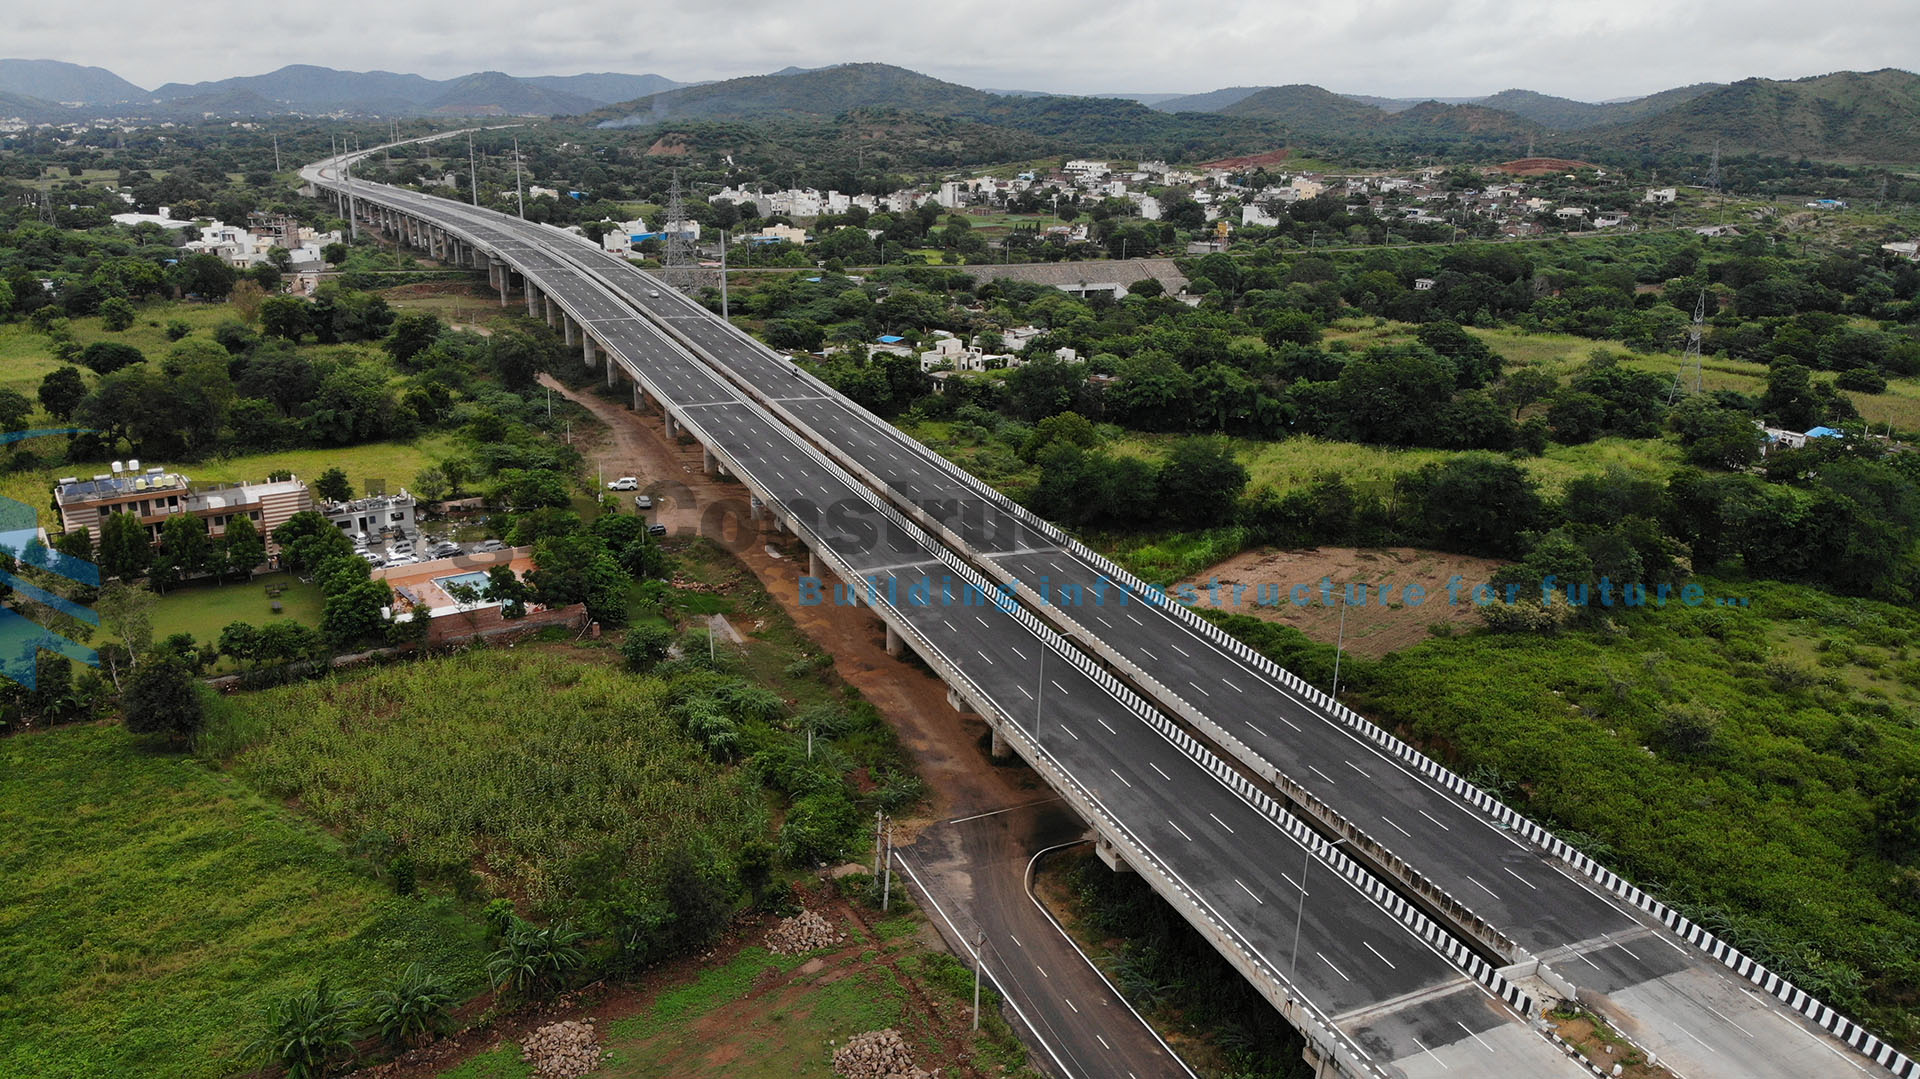 Structure works on 23.883 Km Long, 6 Lane Udaipur Bypass under NHDP in Rajasthan